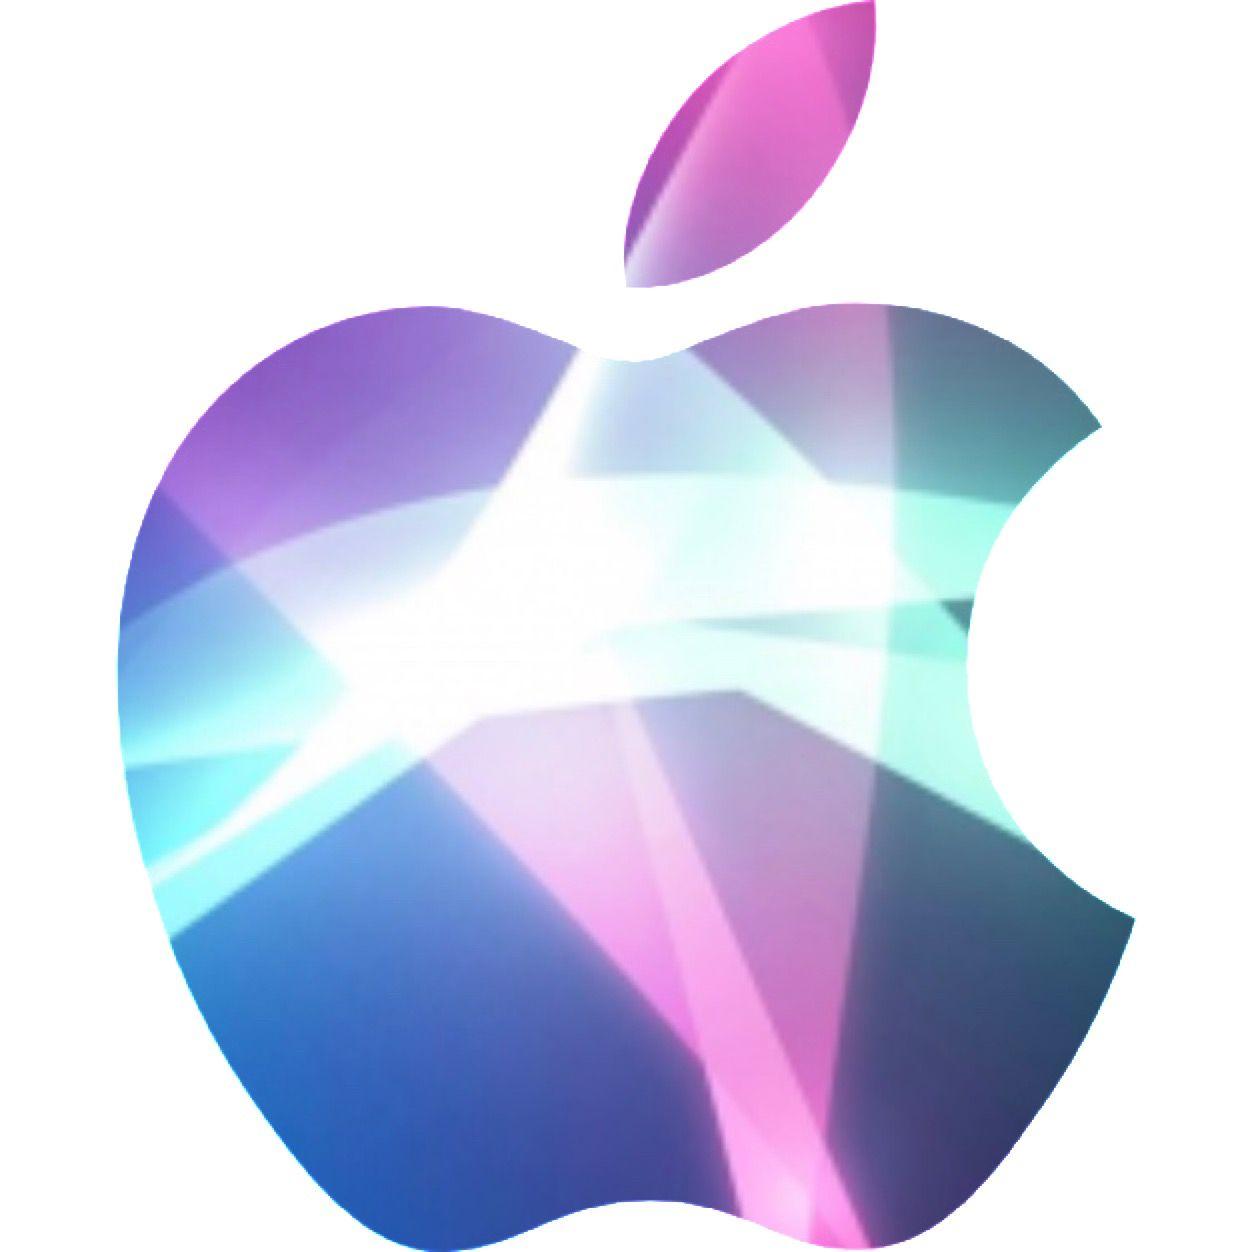 Siri Logo - iPhone 8 Event announced for September 12 at Steve Jobs Theatre